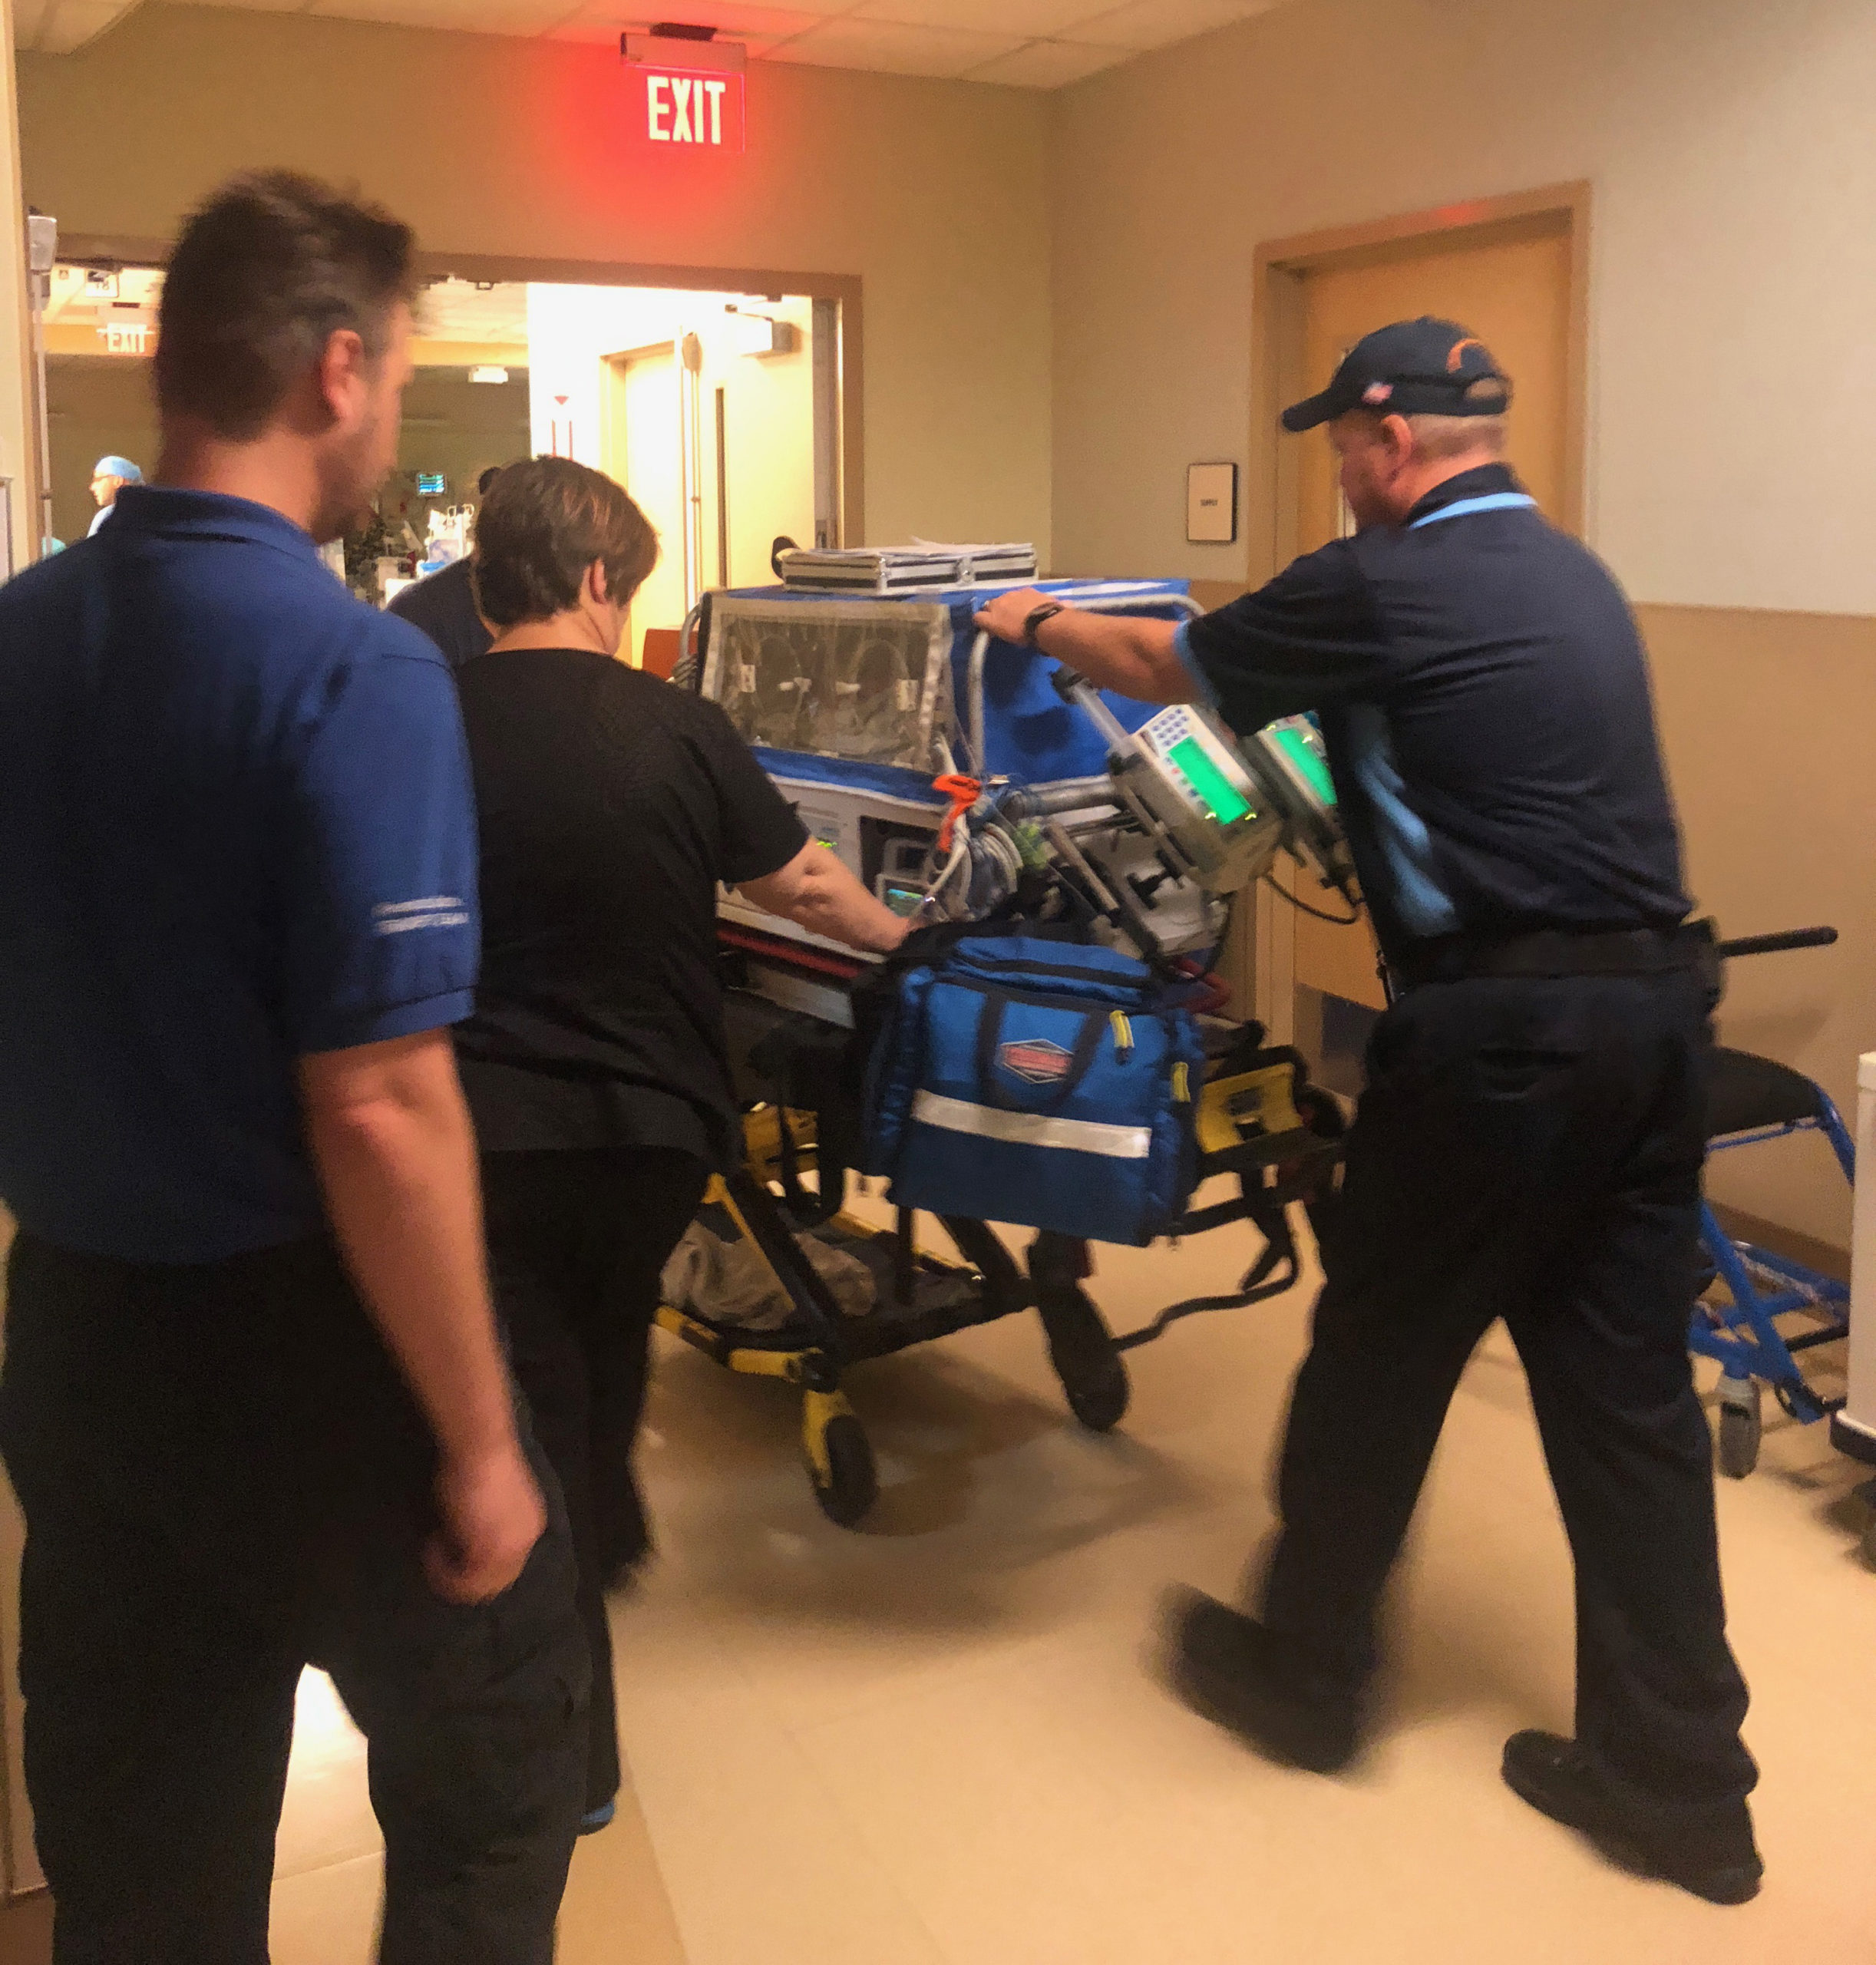 Team of caregivers transporting baby in incubator down hospital hallway